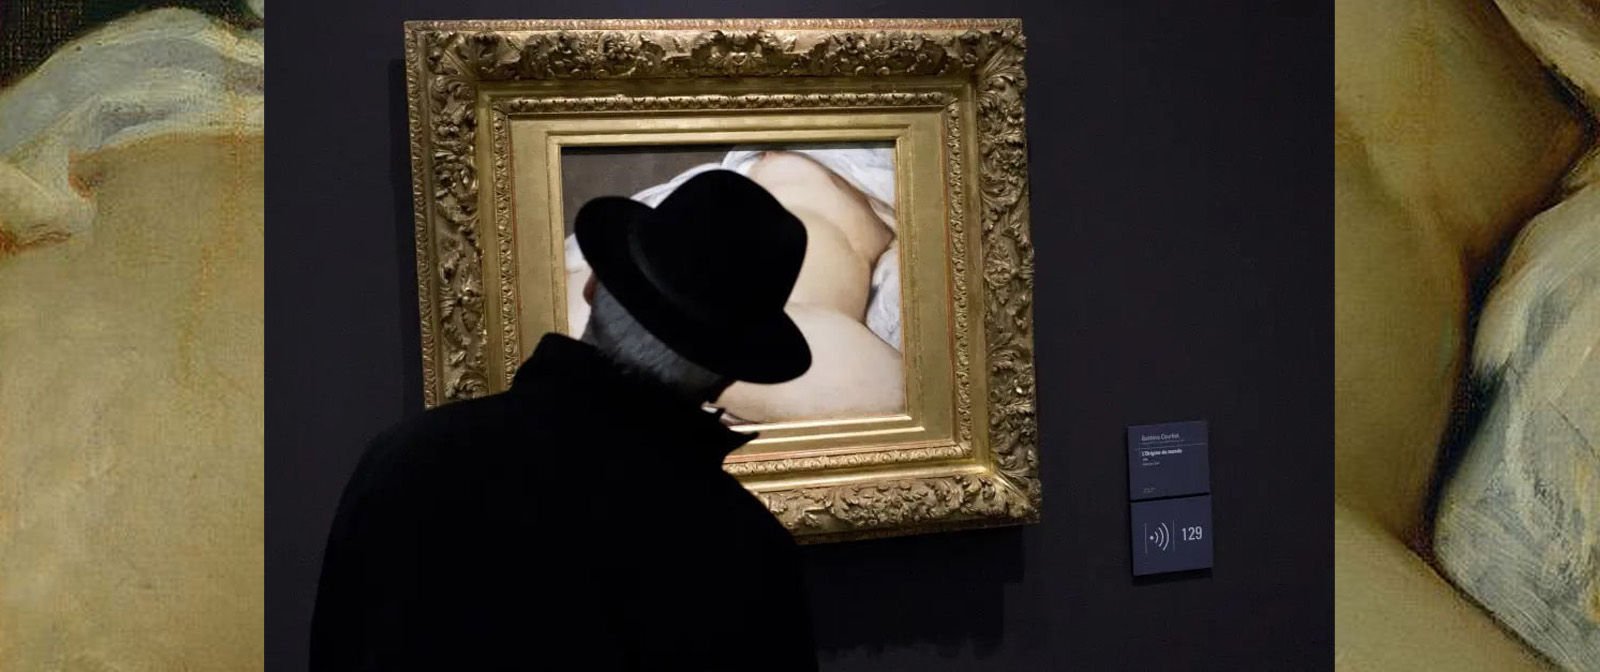 Where is the line between eroticism and art? It's not as simple as it seems.